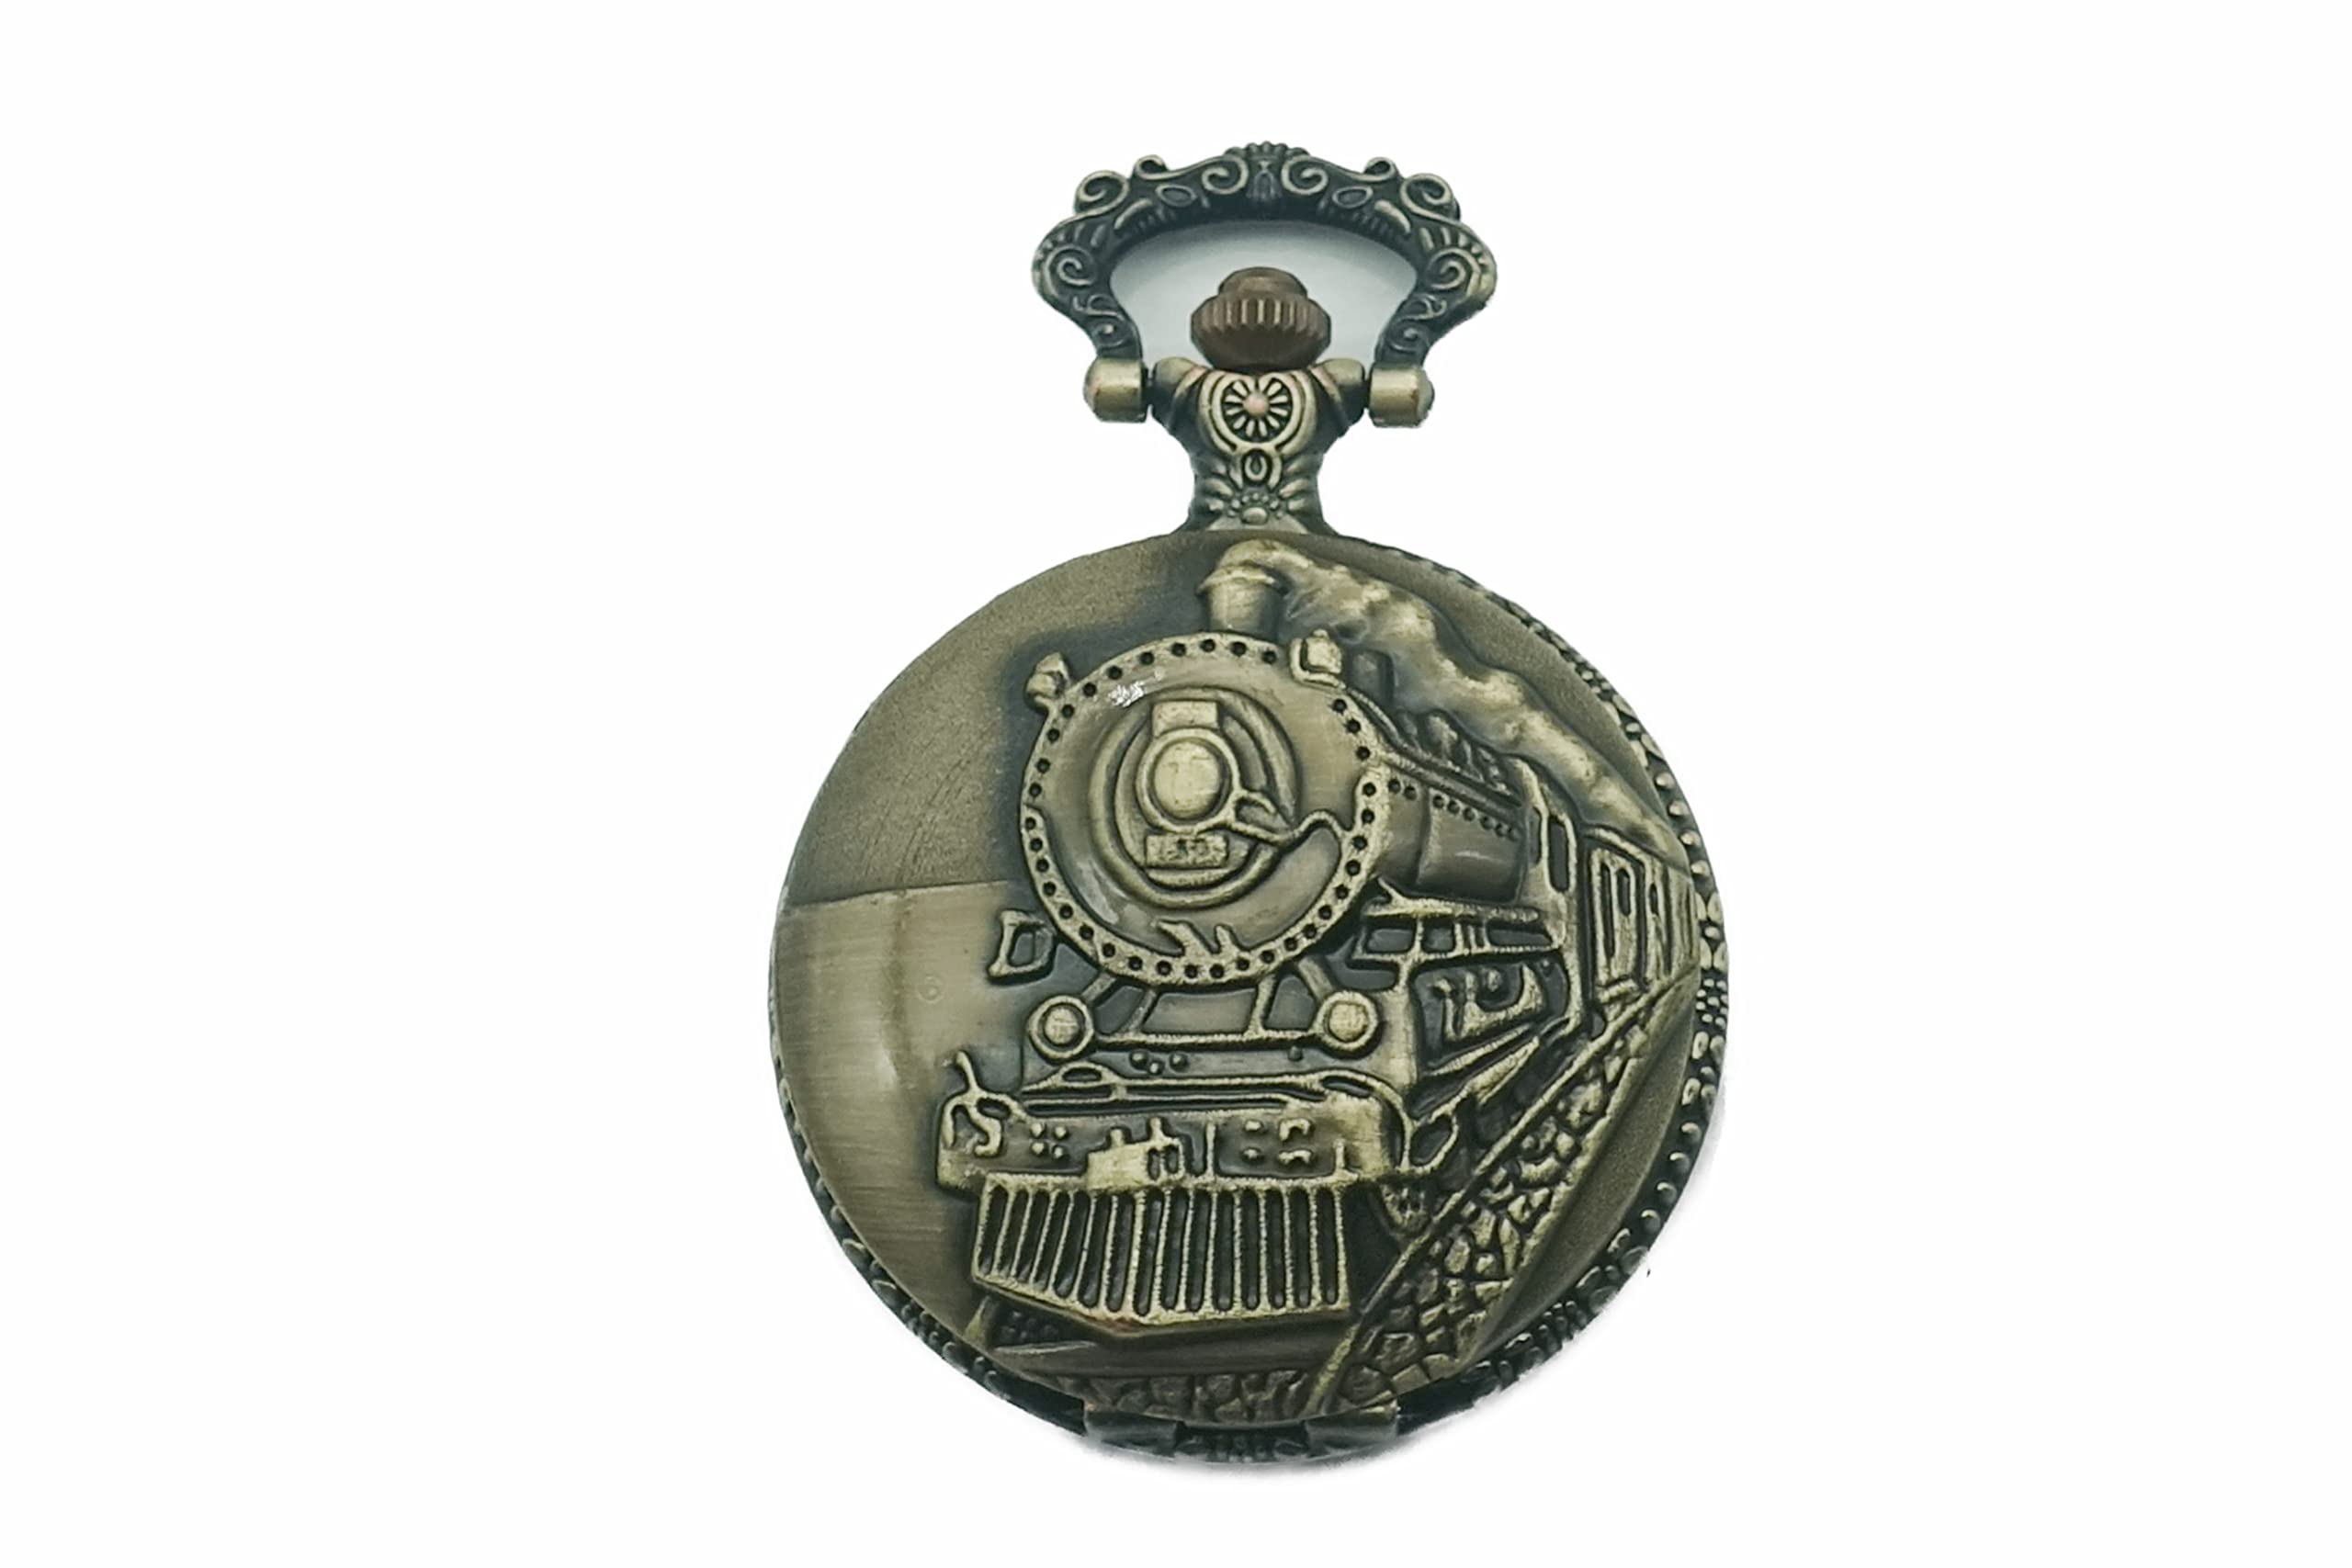 Pinnacle Awards Canada Railroad Regulation Pocket Watch with 2 Chains, Japanese Movement Steam Engine #1